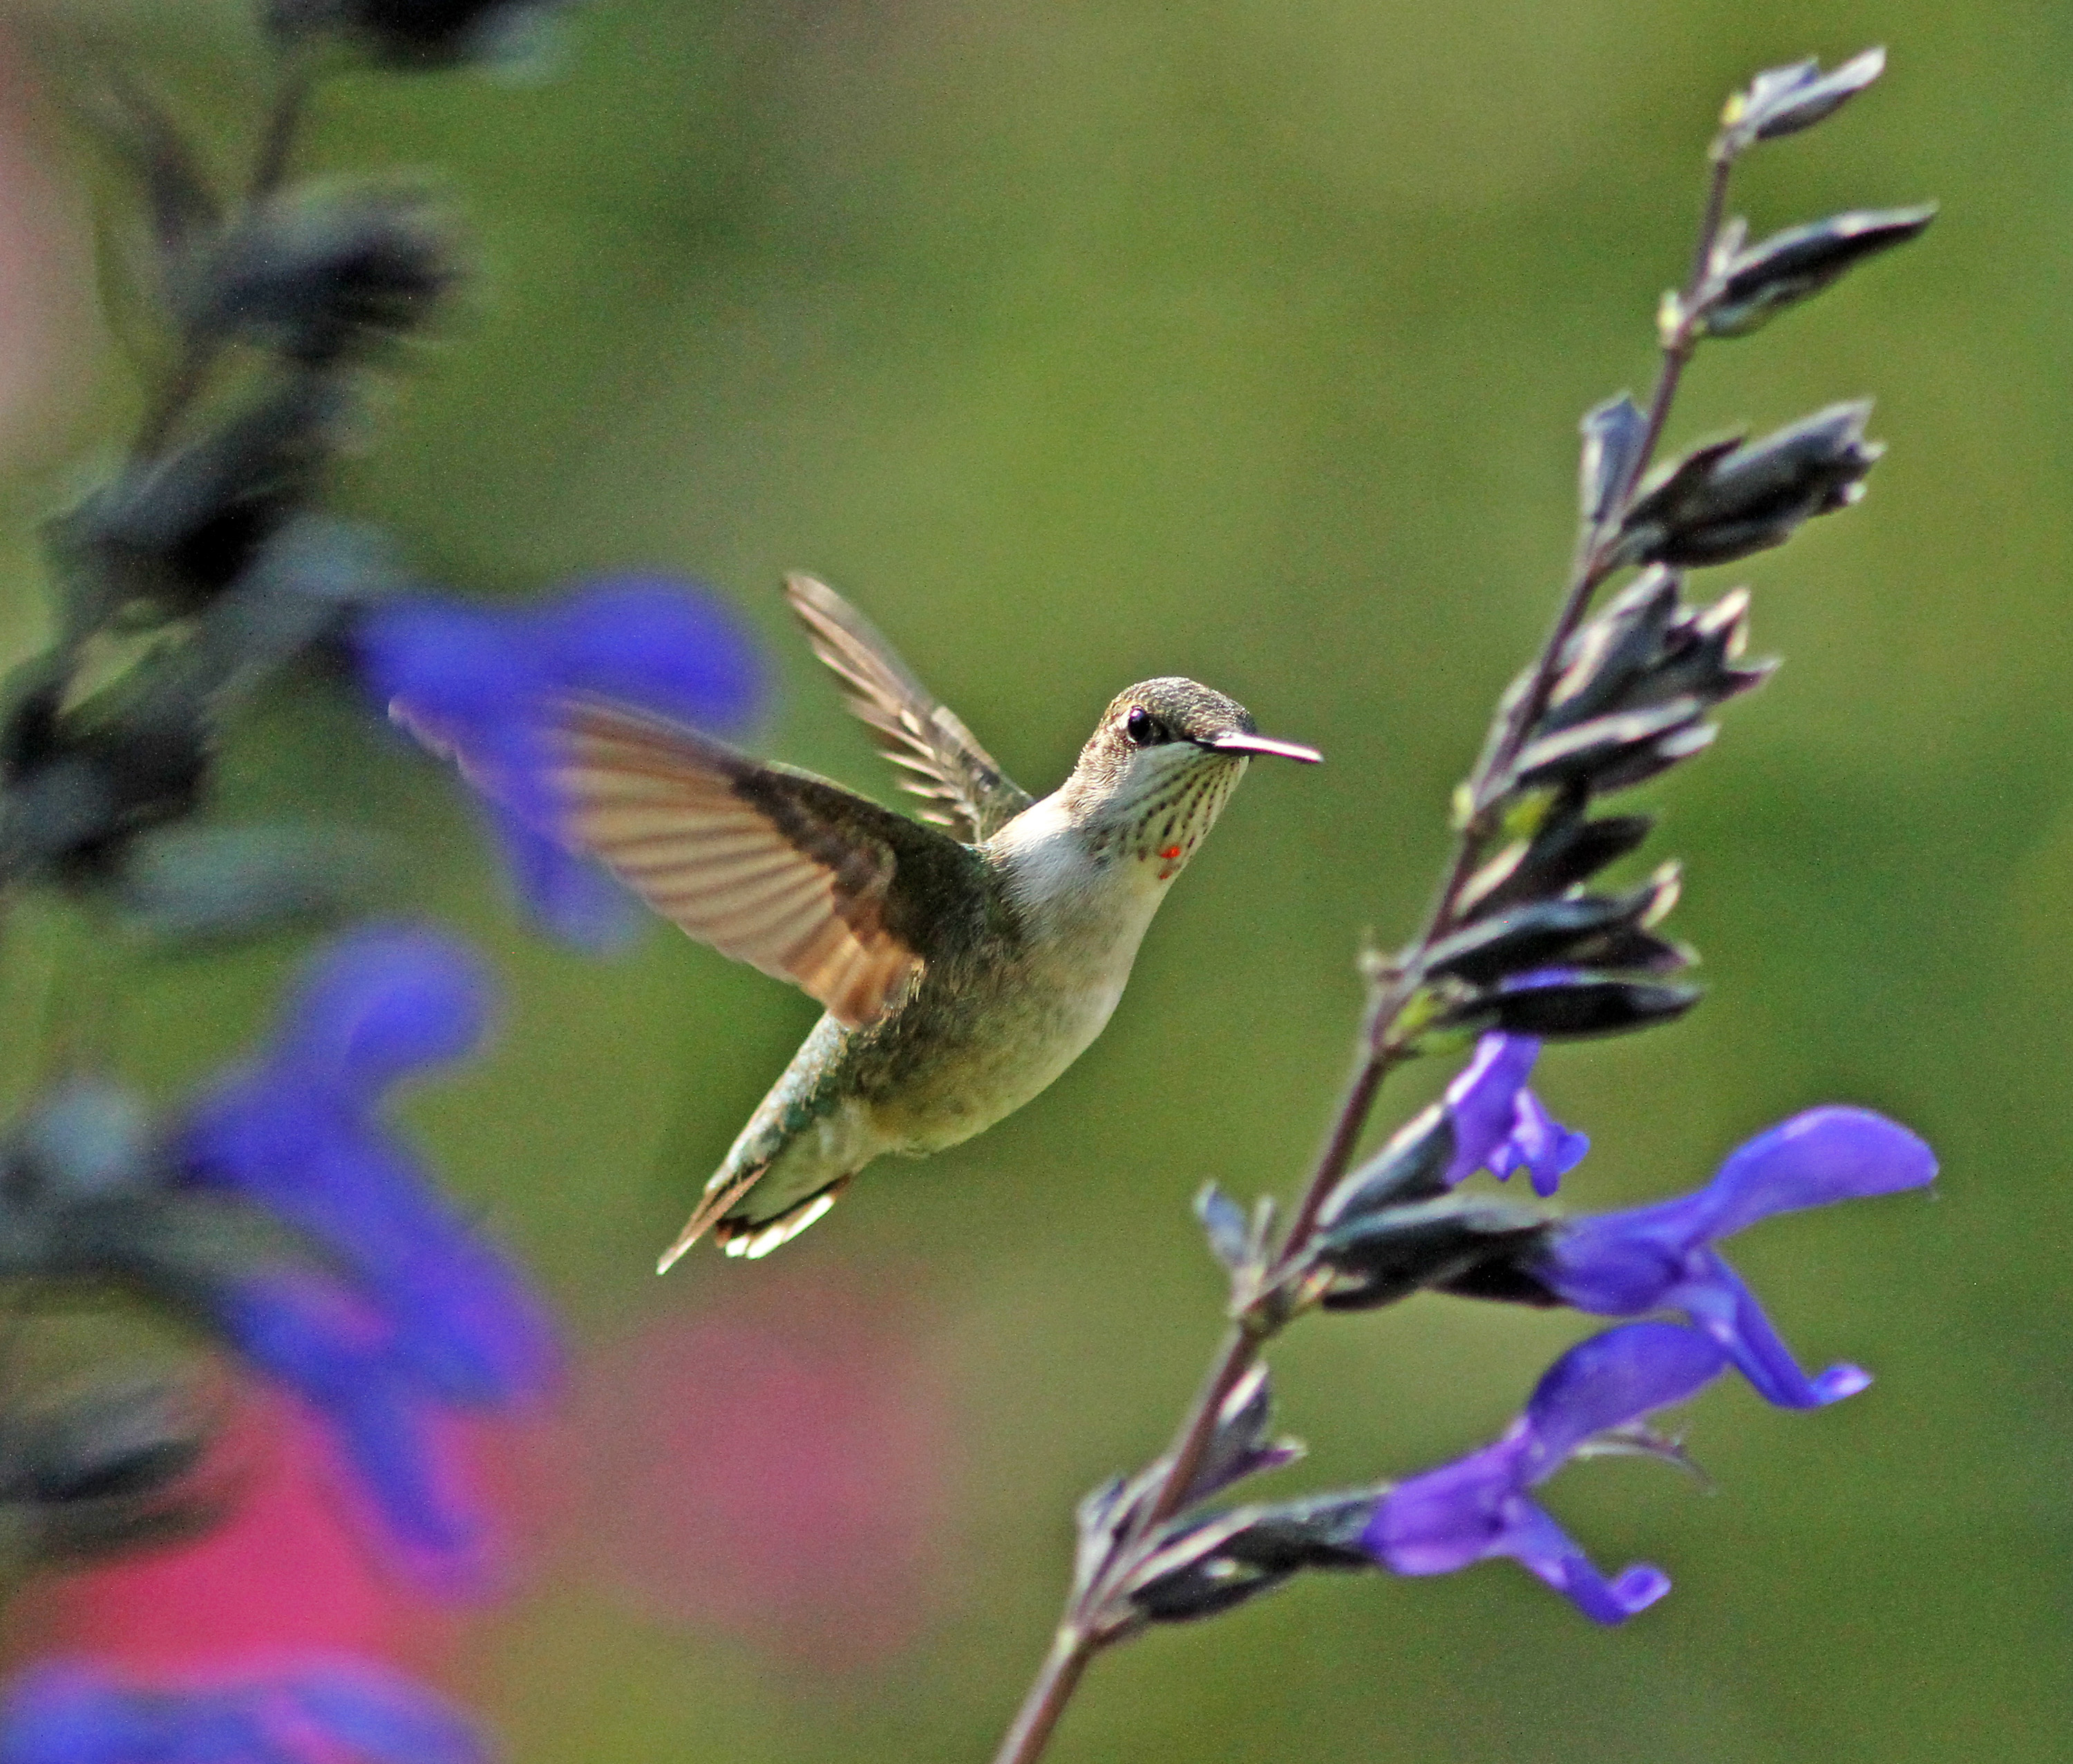 A Young Hummer